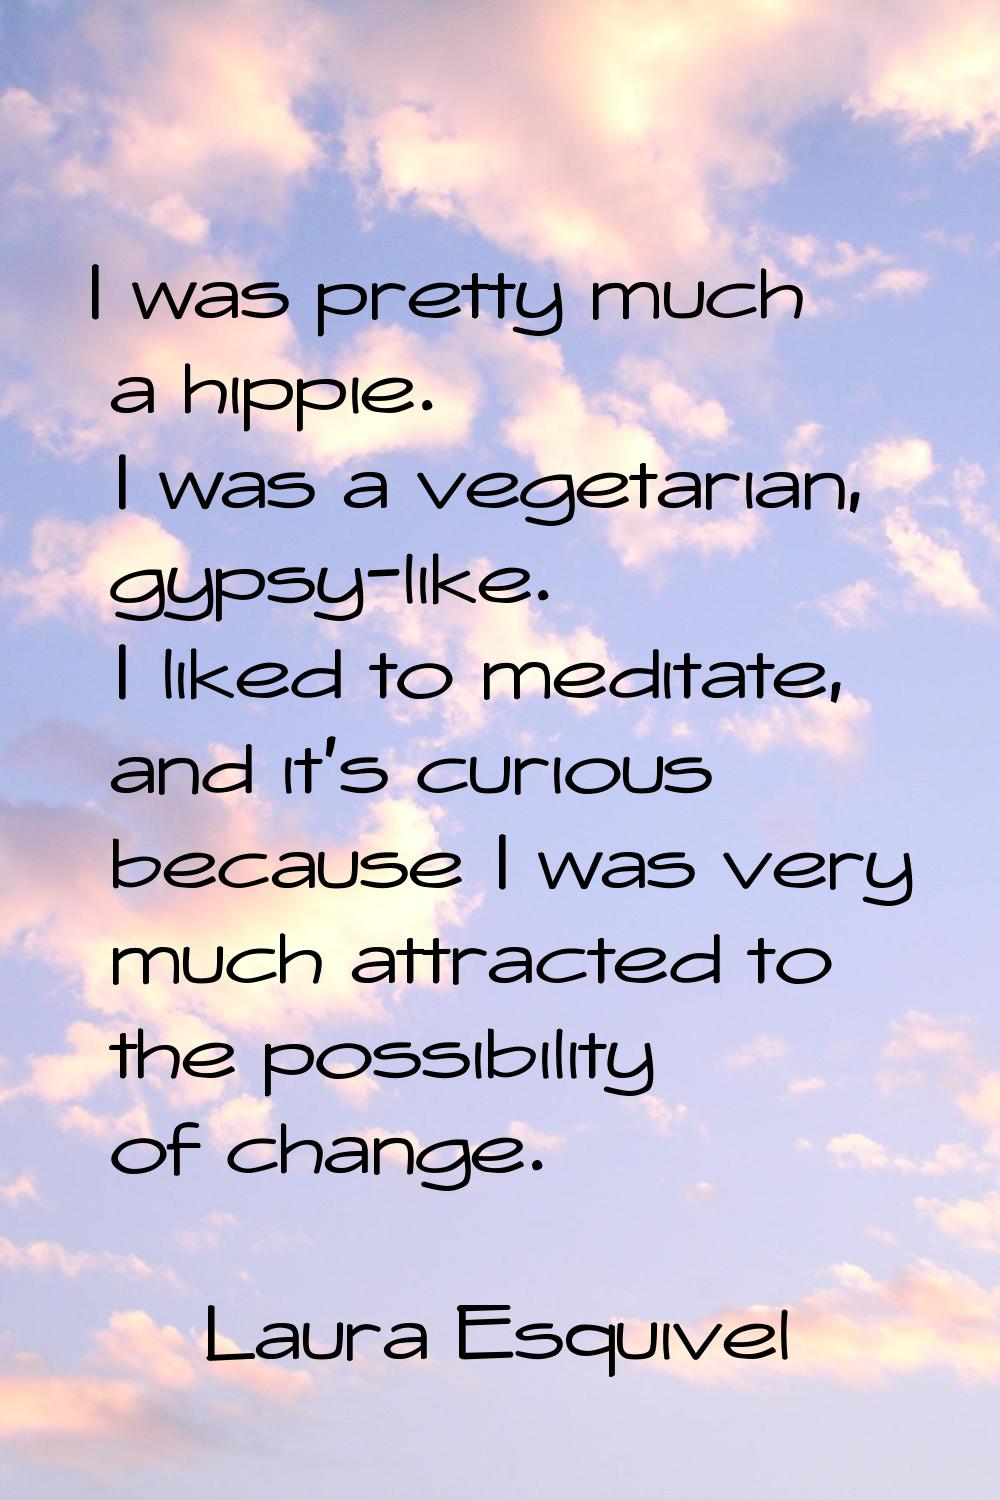 I was pretty much a hippie. I was a vegetarian, gypsy-like. I liked to meditate, and it's curious b